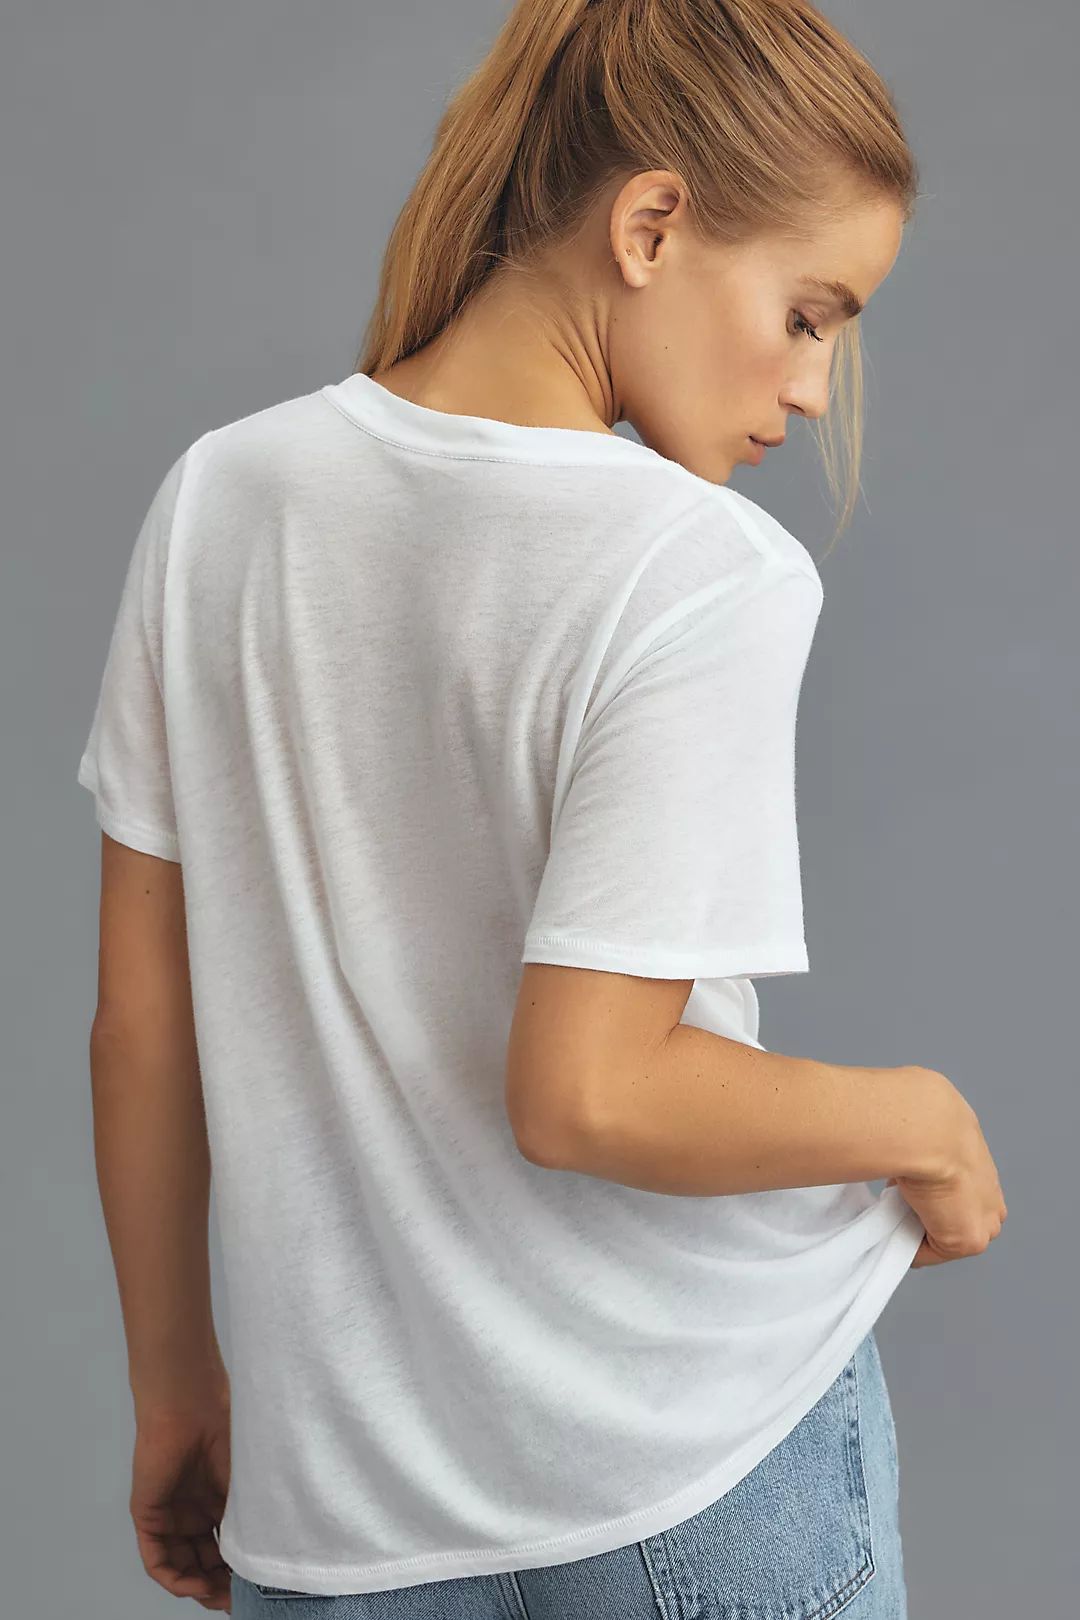 Back When Tough as a Mother Tee | Anthropologie (US)